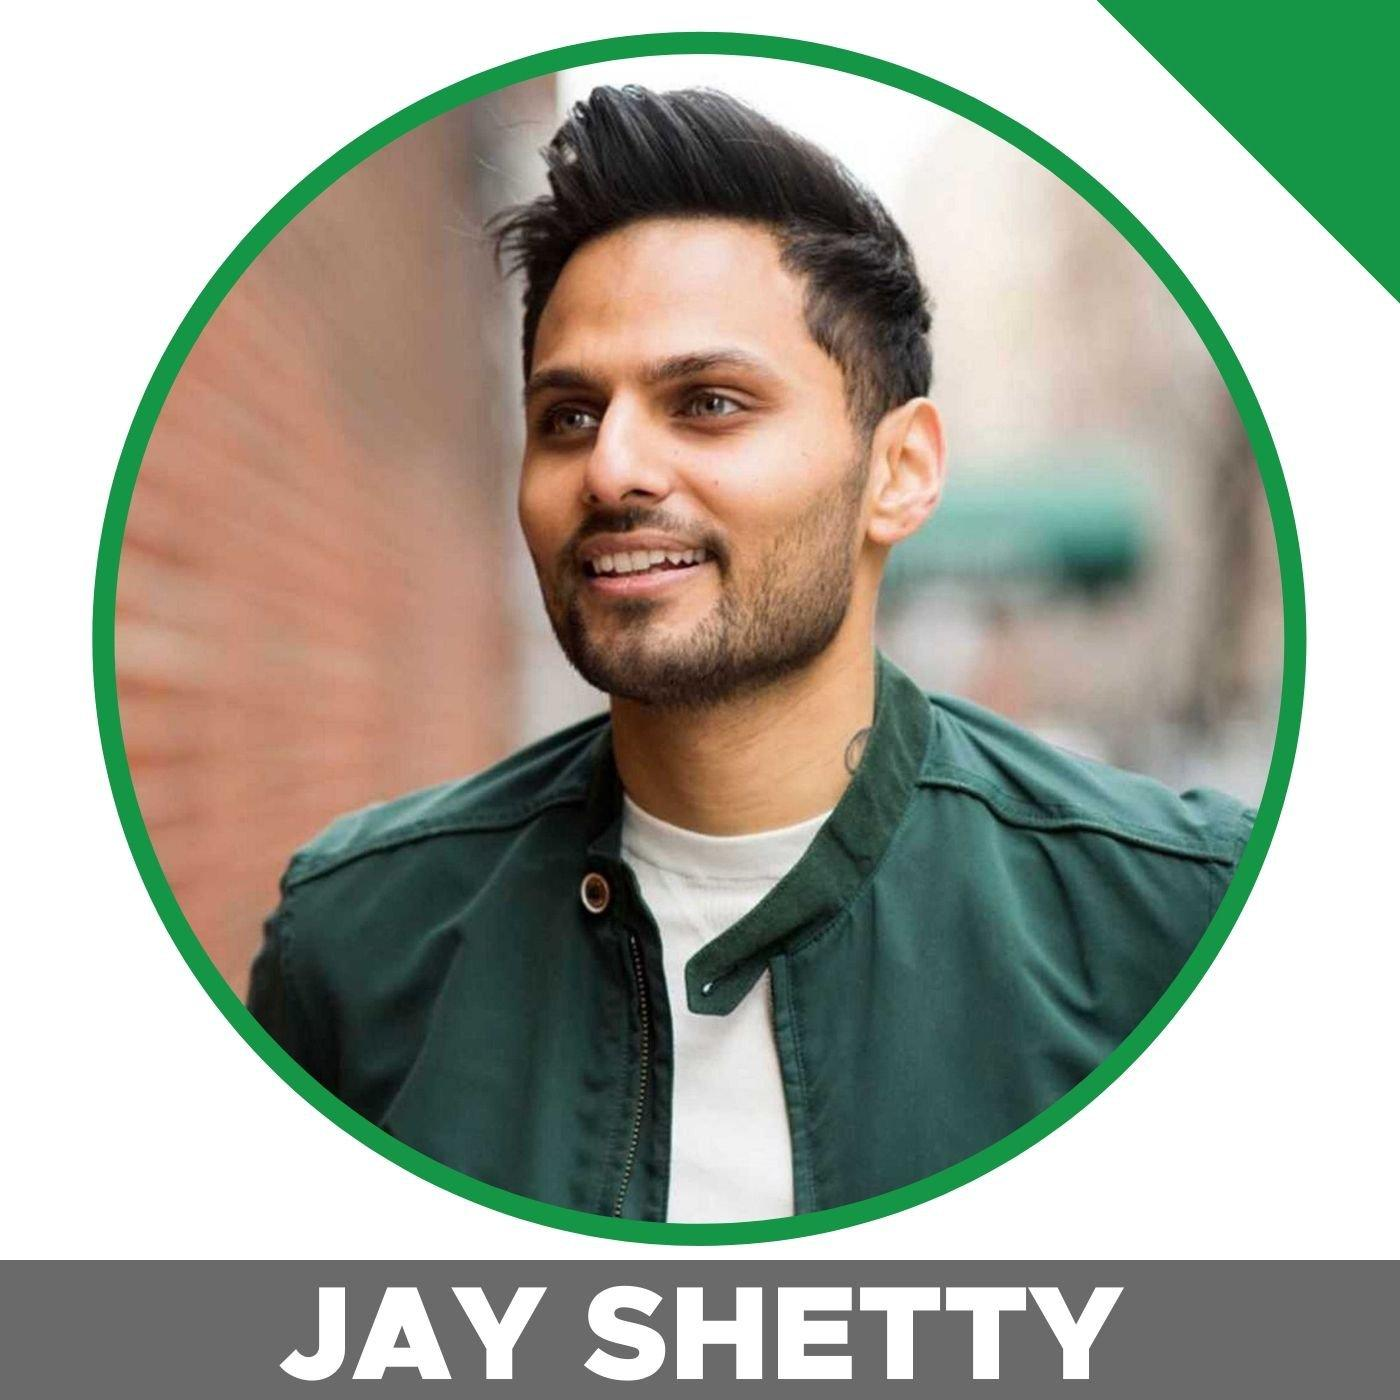 Blue Zones, Physical, Emotional, & Mental Presence, Bodily & Spiritual Fitness, Light Discipline, Changing Habits & More With Jay Shetty.